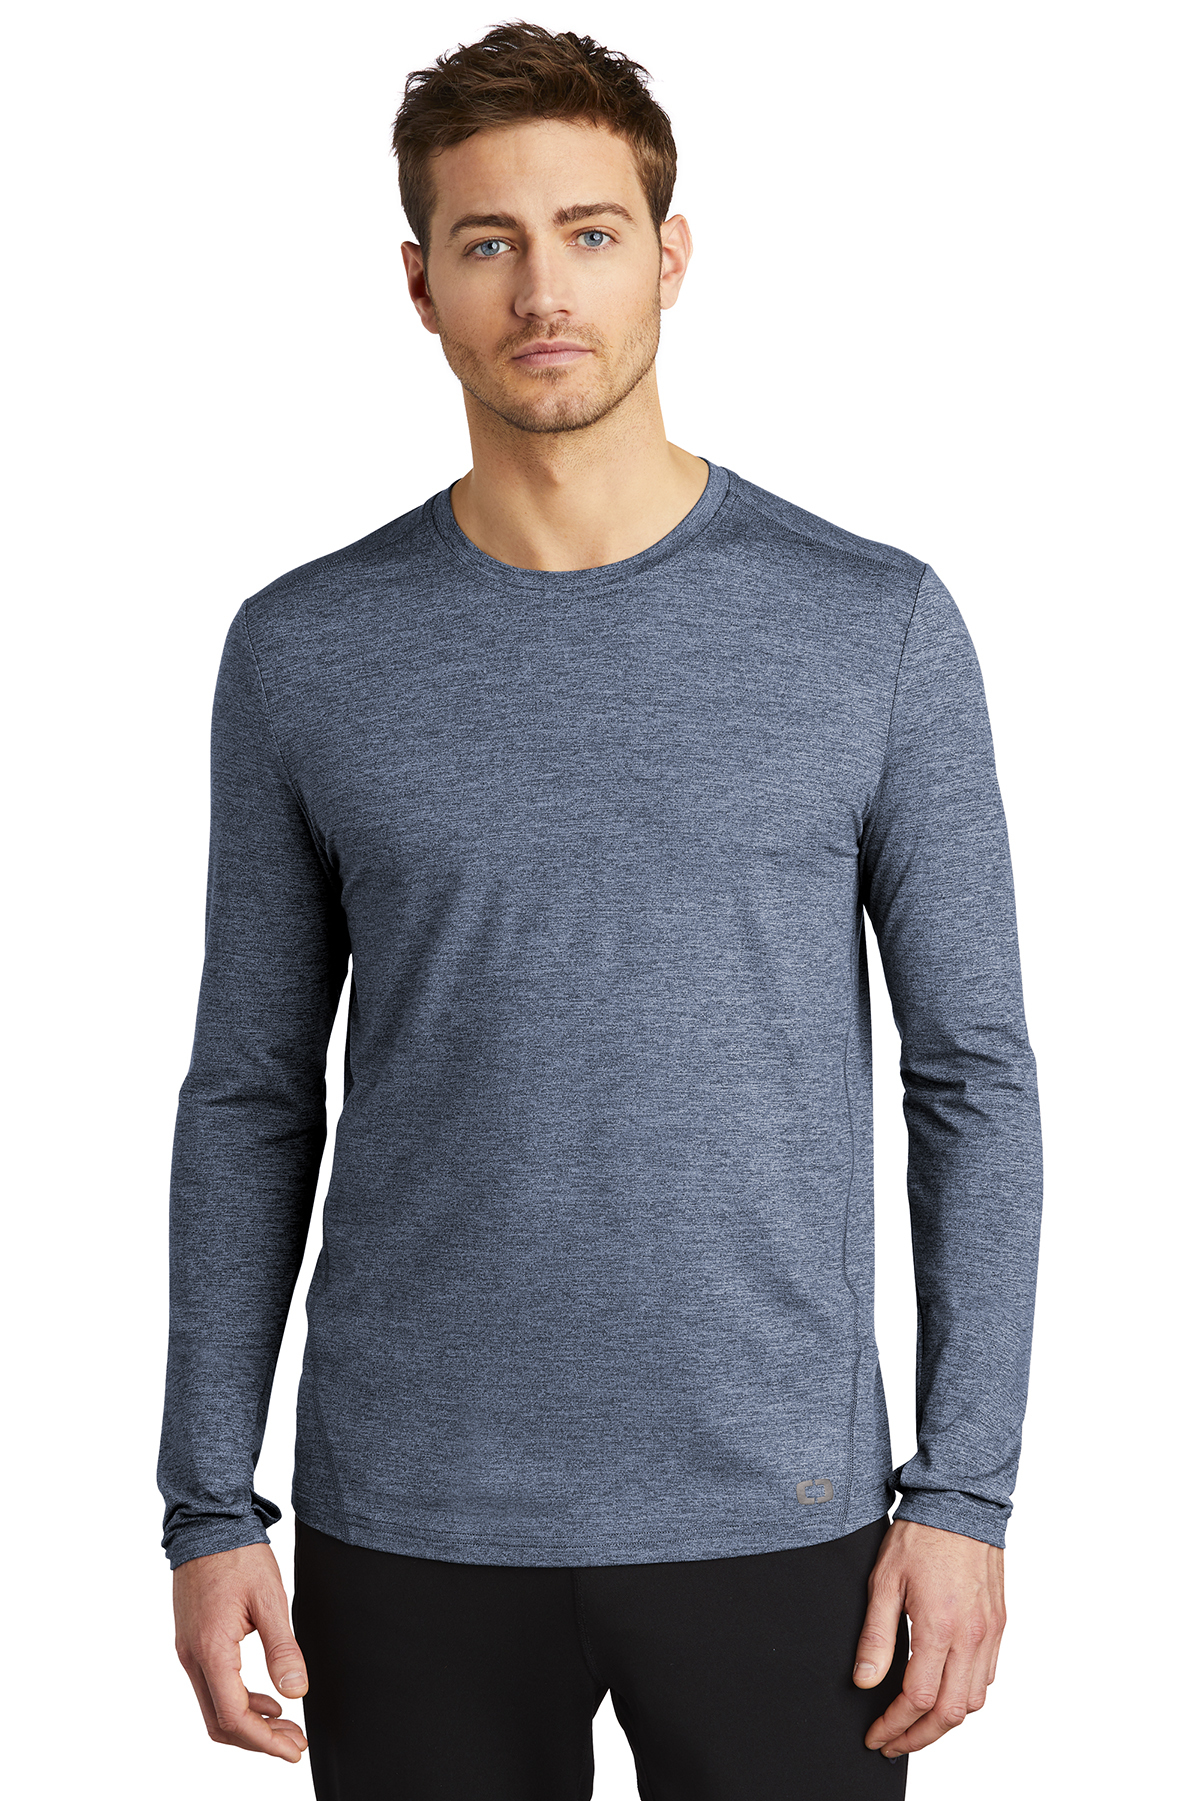 OGIO Force Long Sleeve Tee | Product | Company Casuals